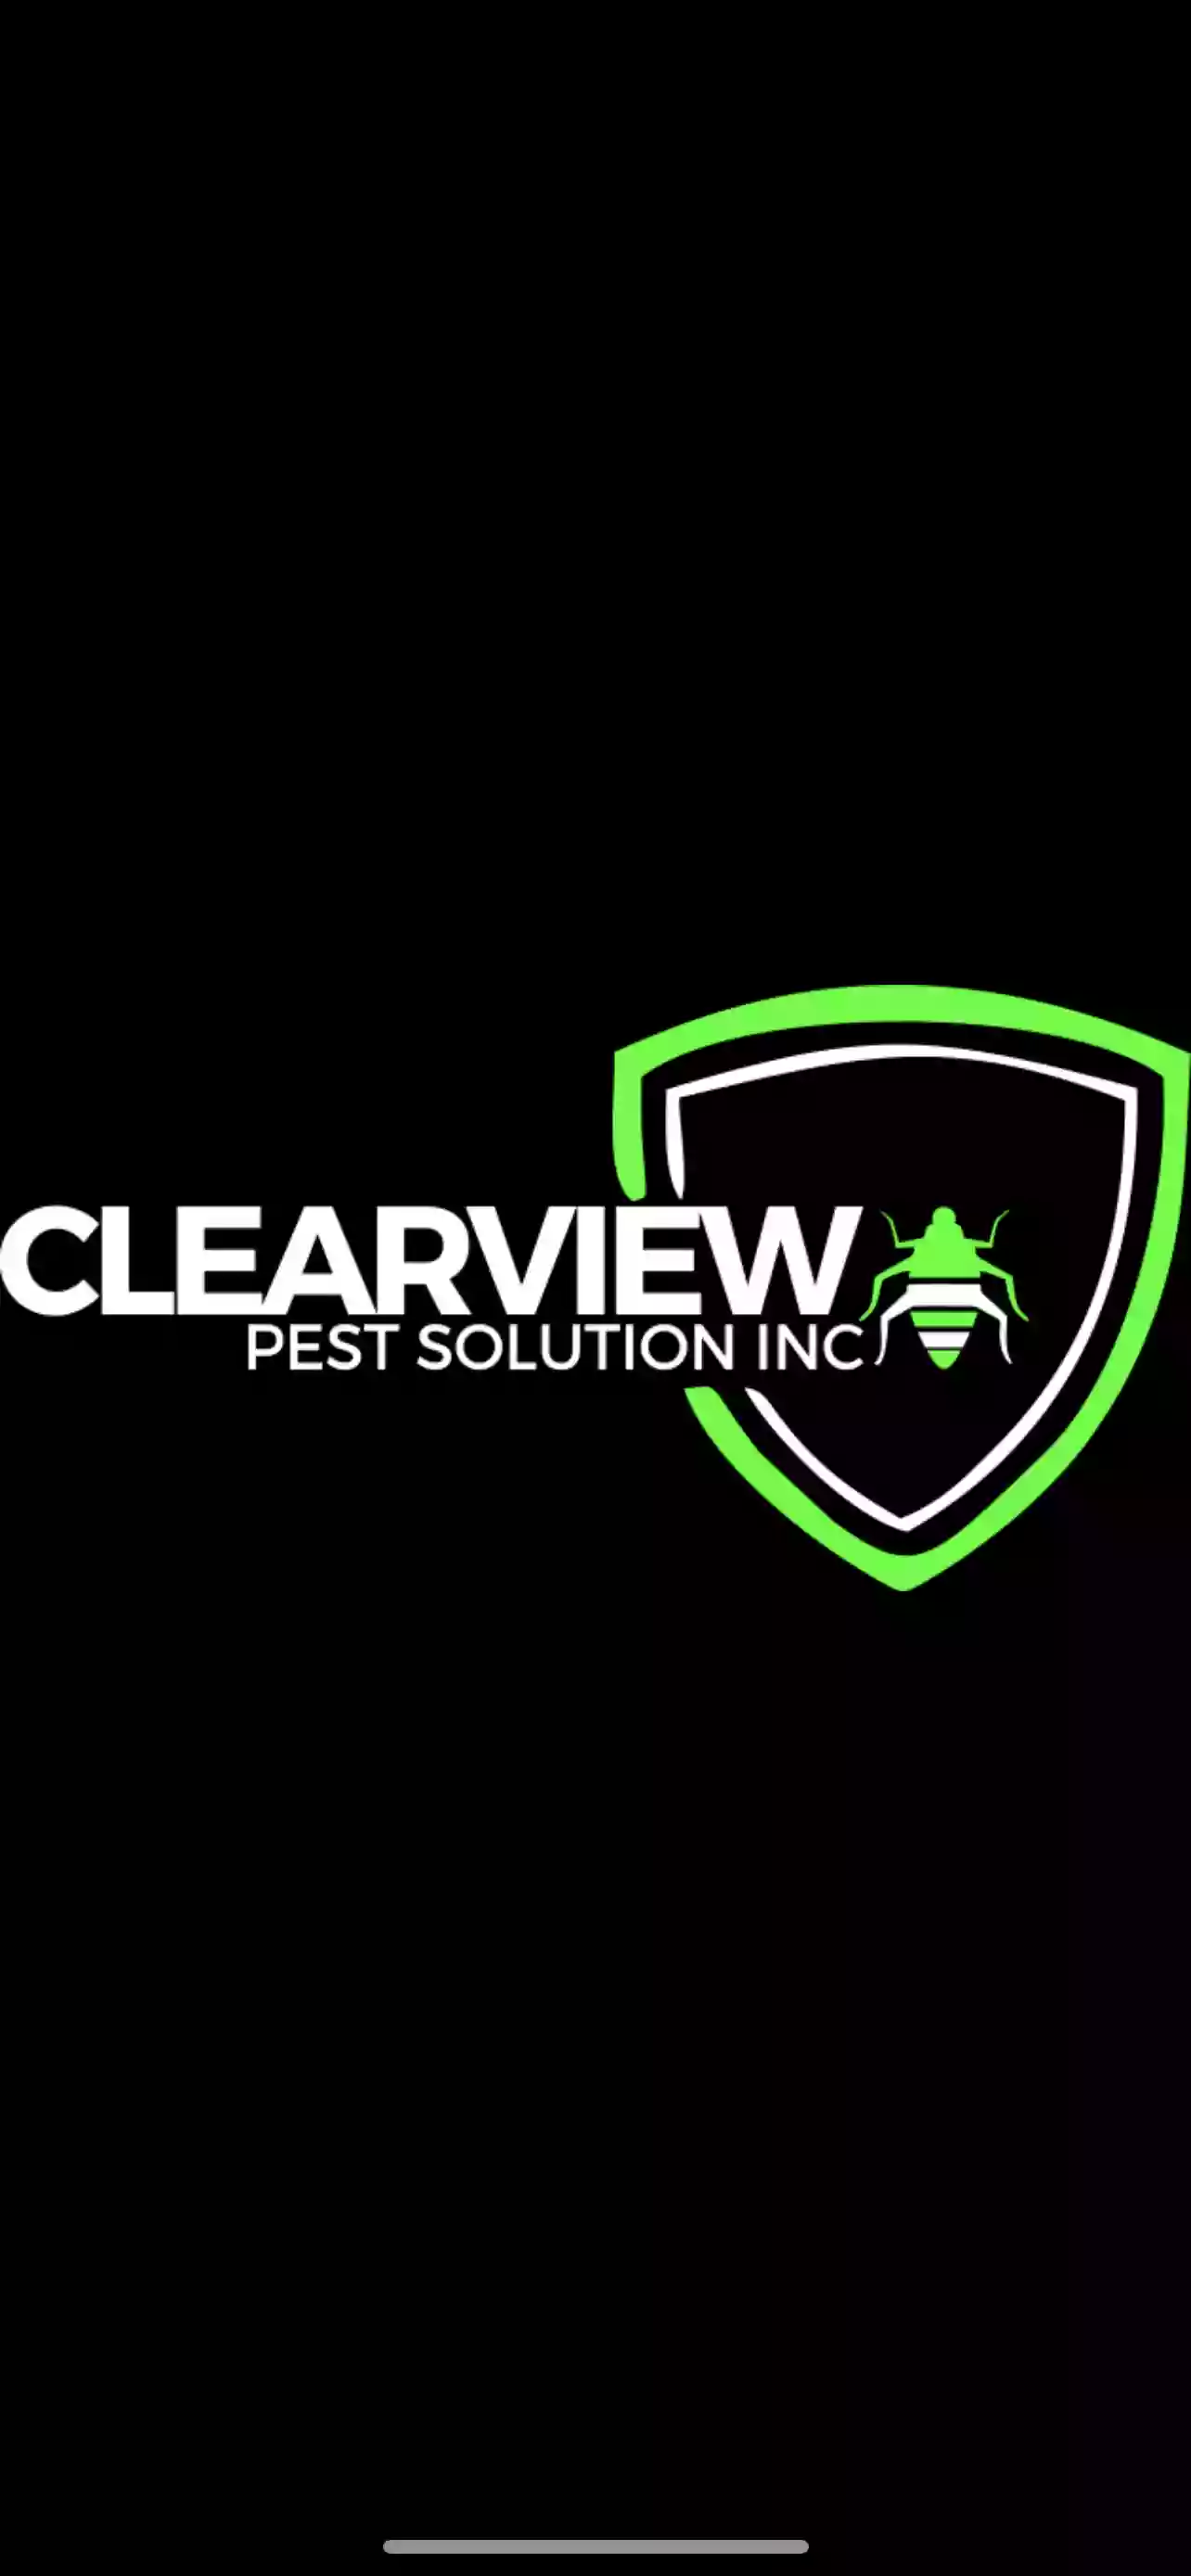 Clearview Pest Solutions inc.